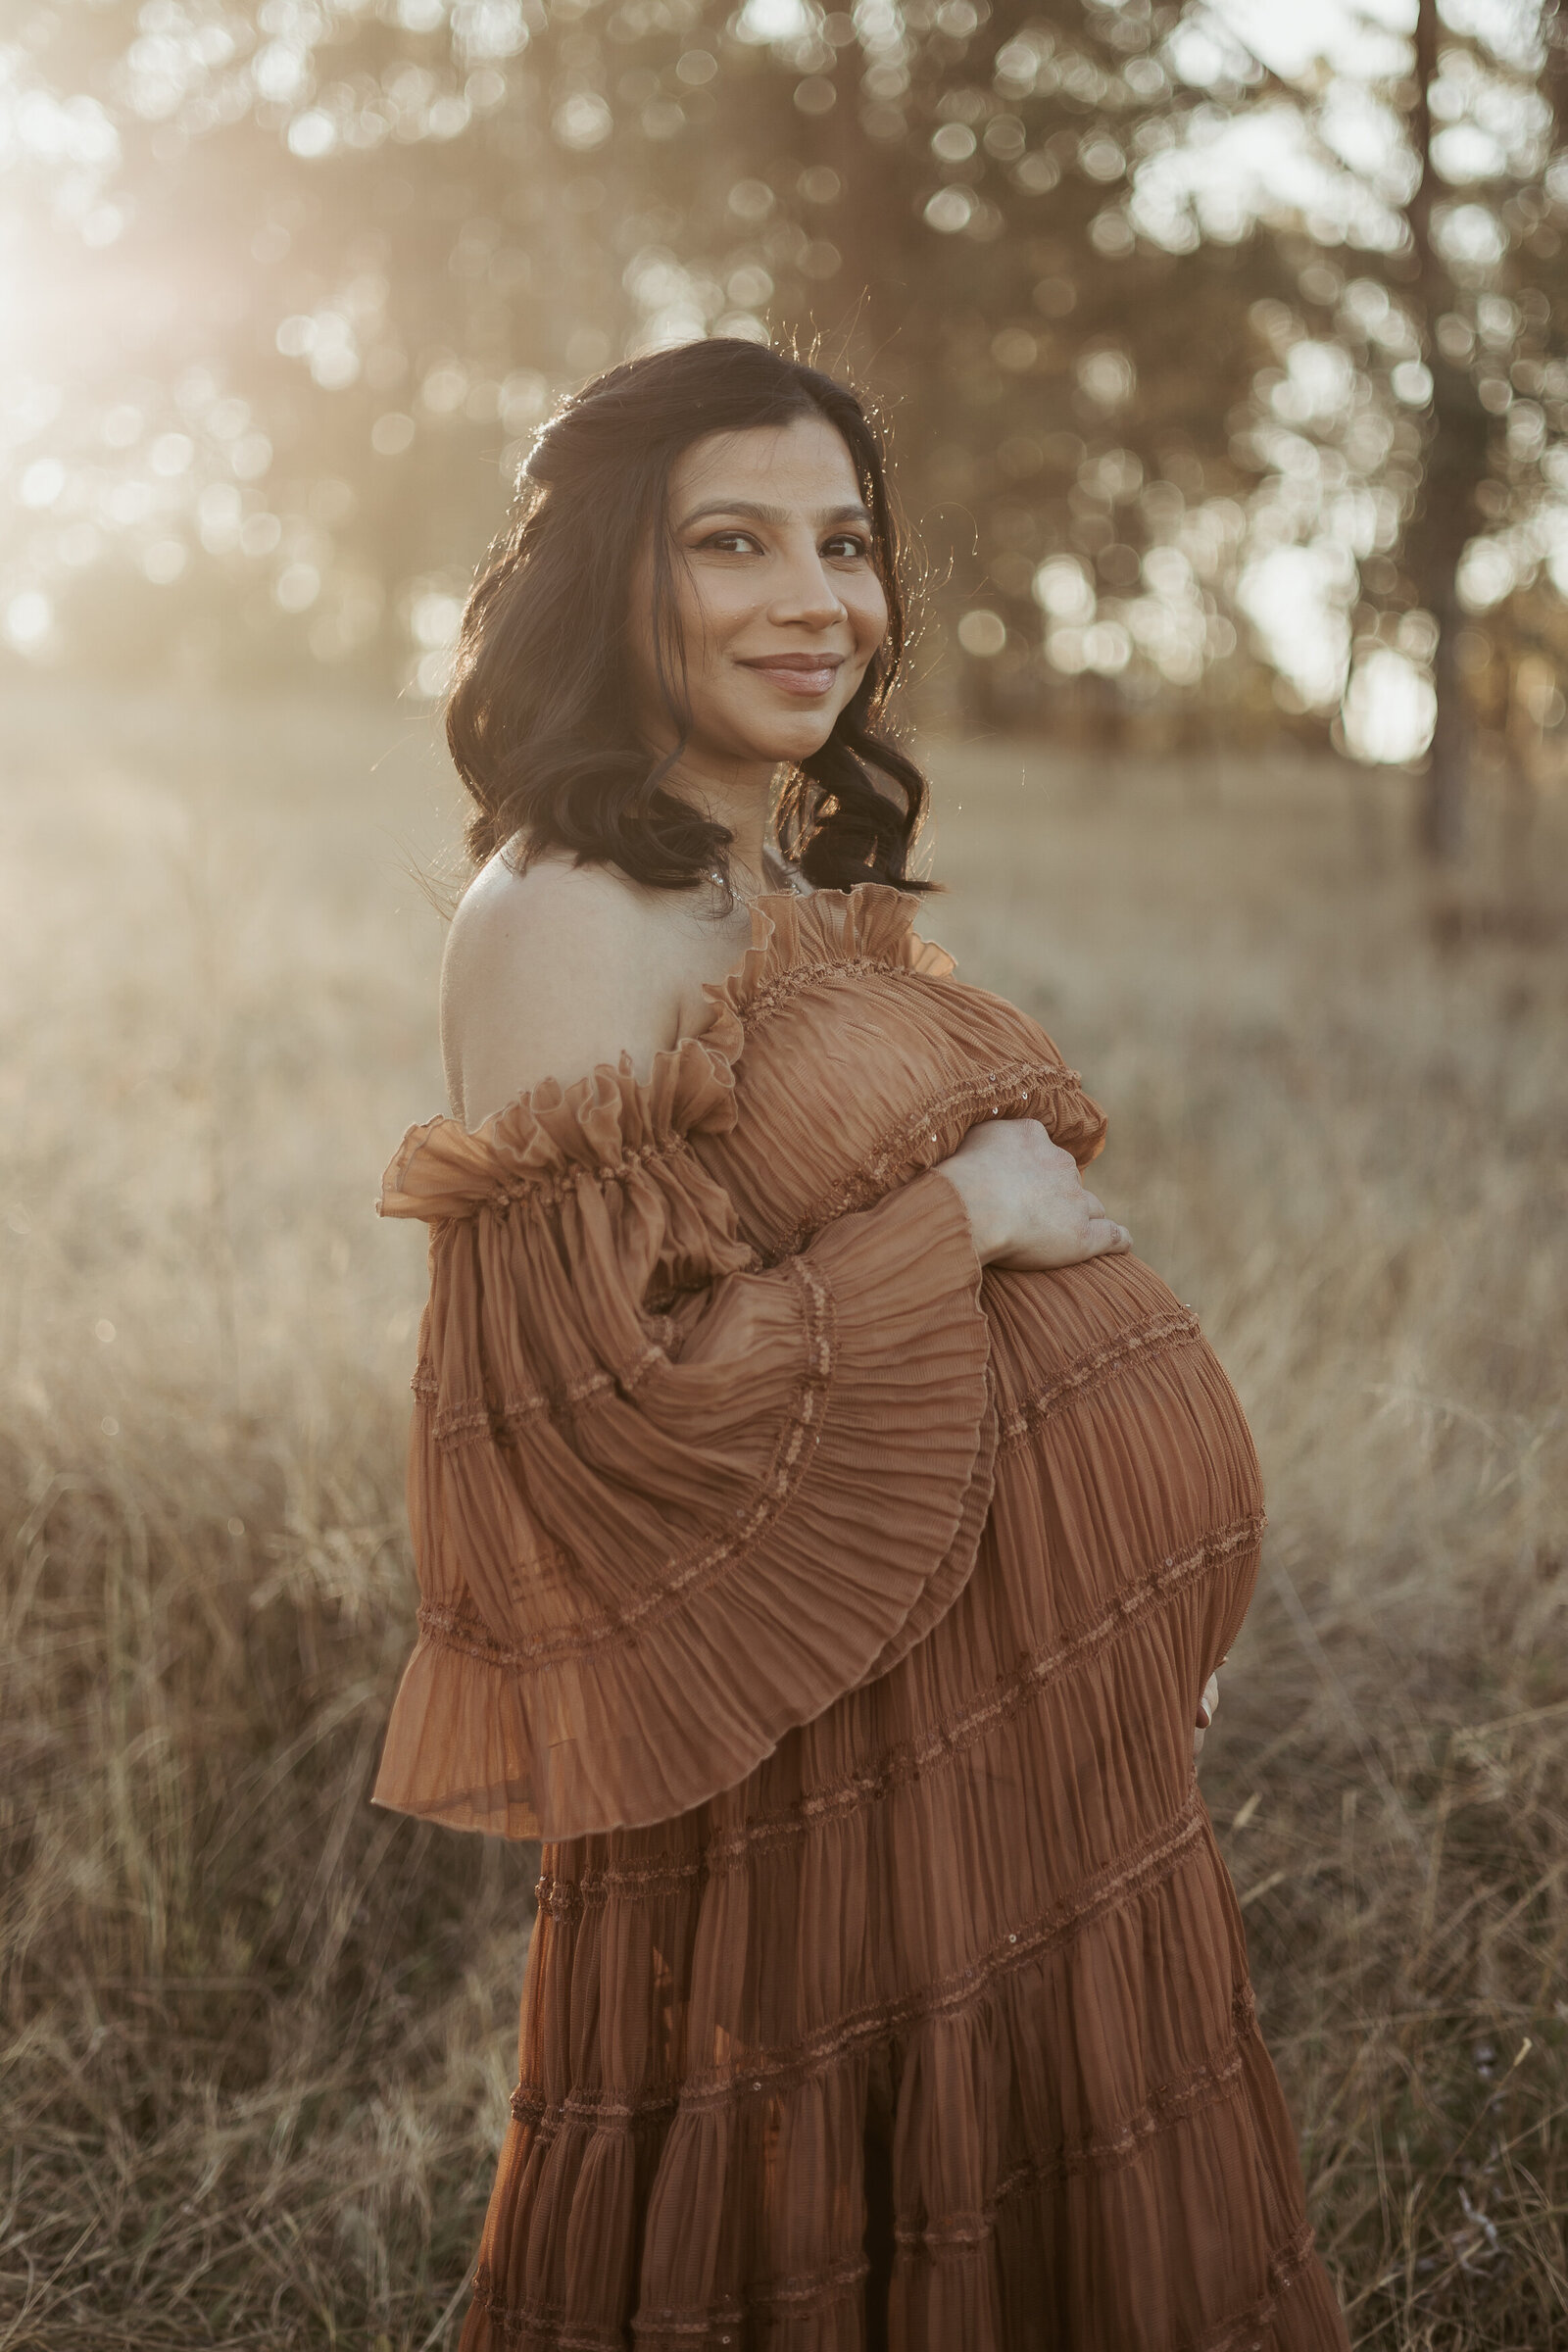 Glowing pregnant mama wearing a long brown dress looking directly at the camera